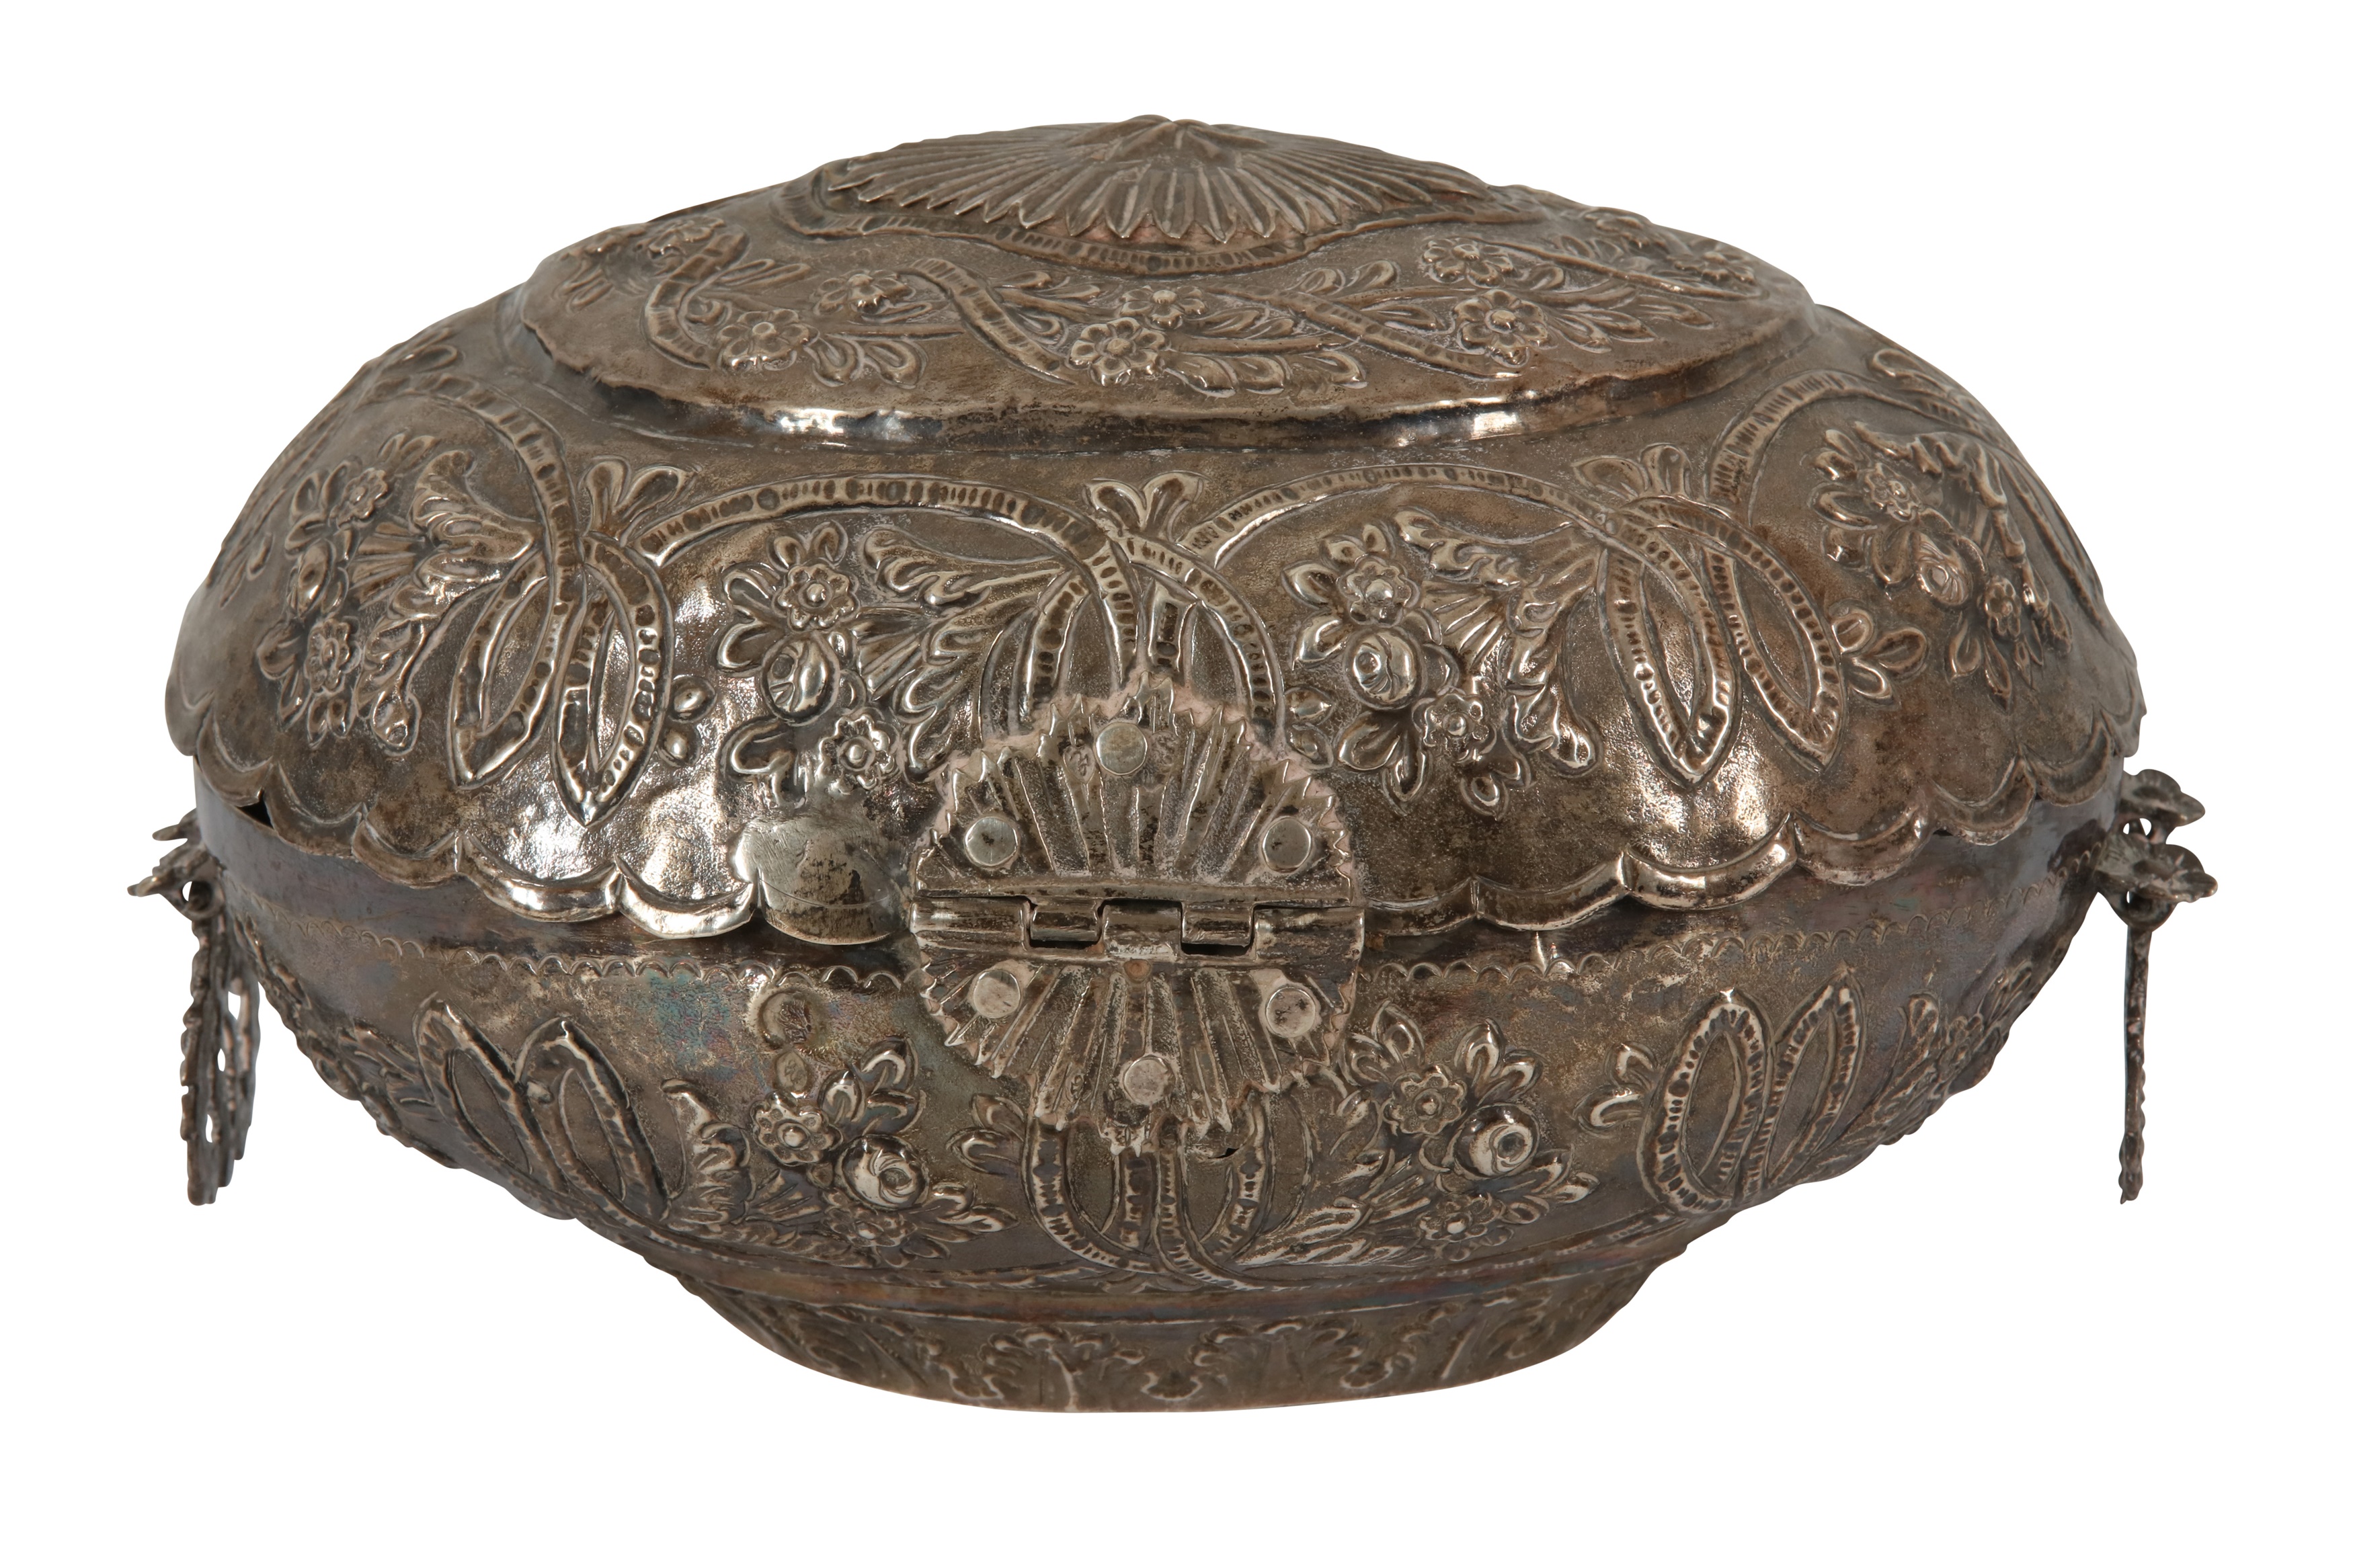 AN OTTOMAN SILVER OVAL CASKET OR SPICE BOX, LATE 19TH/EARLY 20TH CENTURY